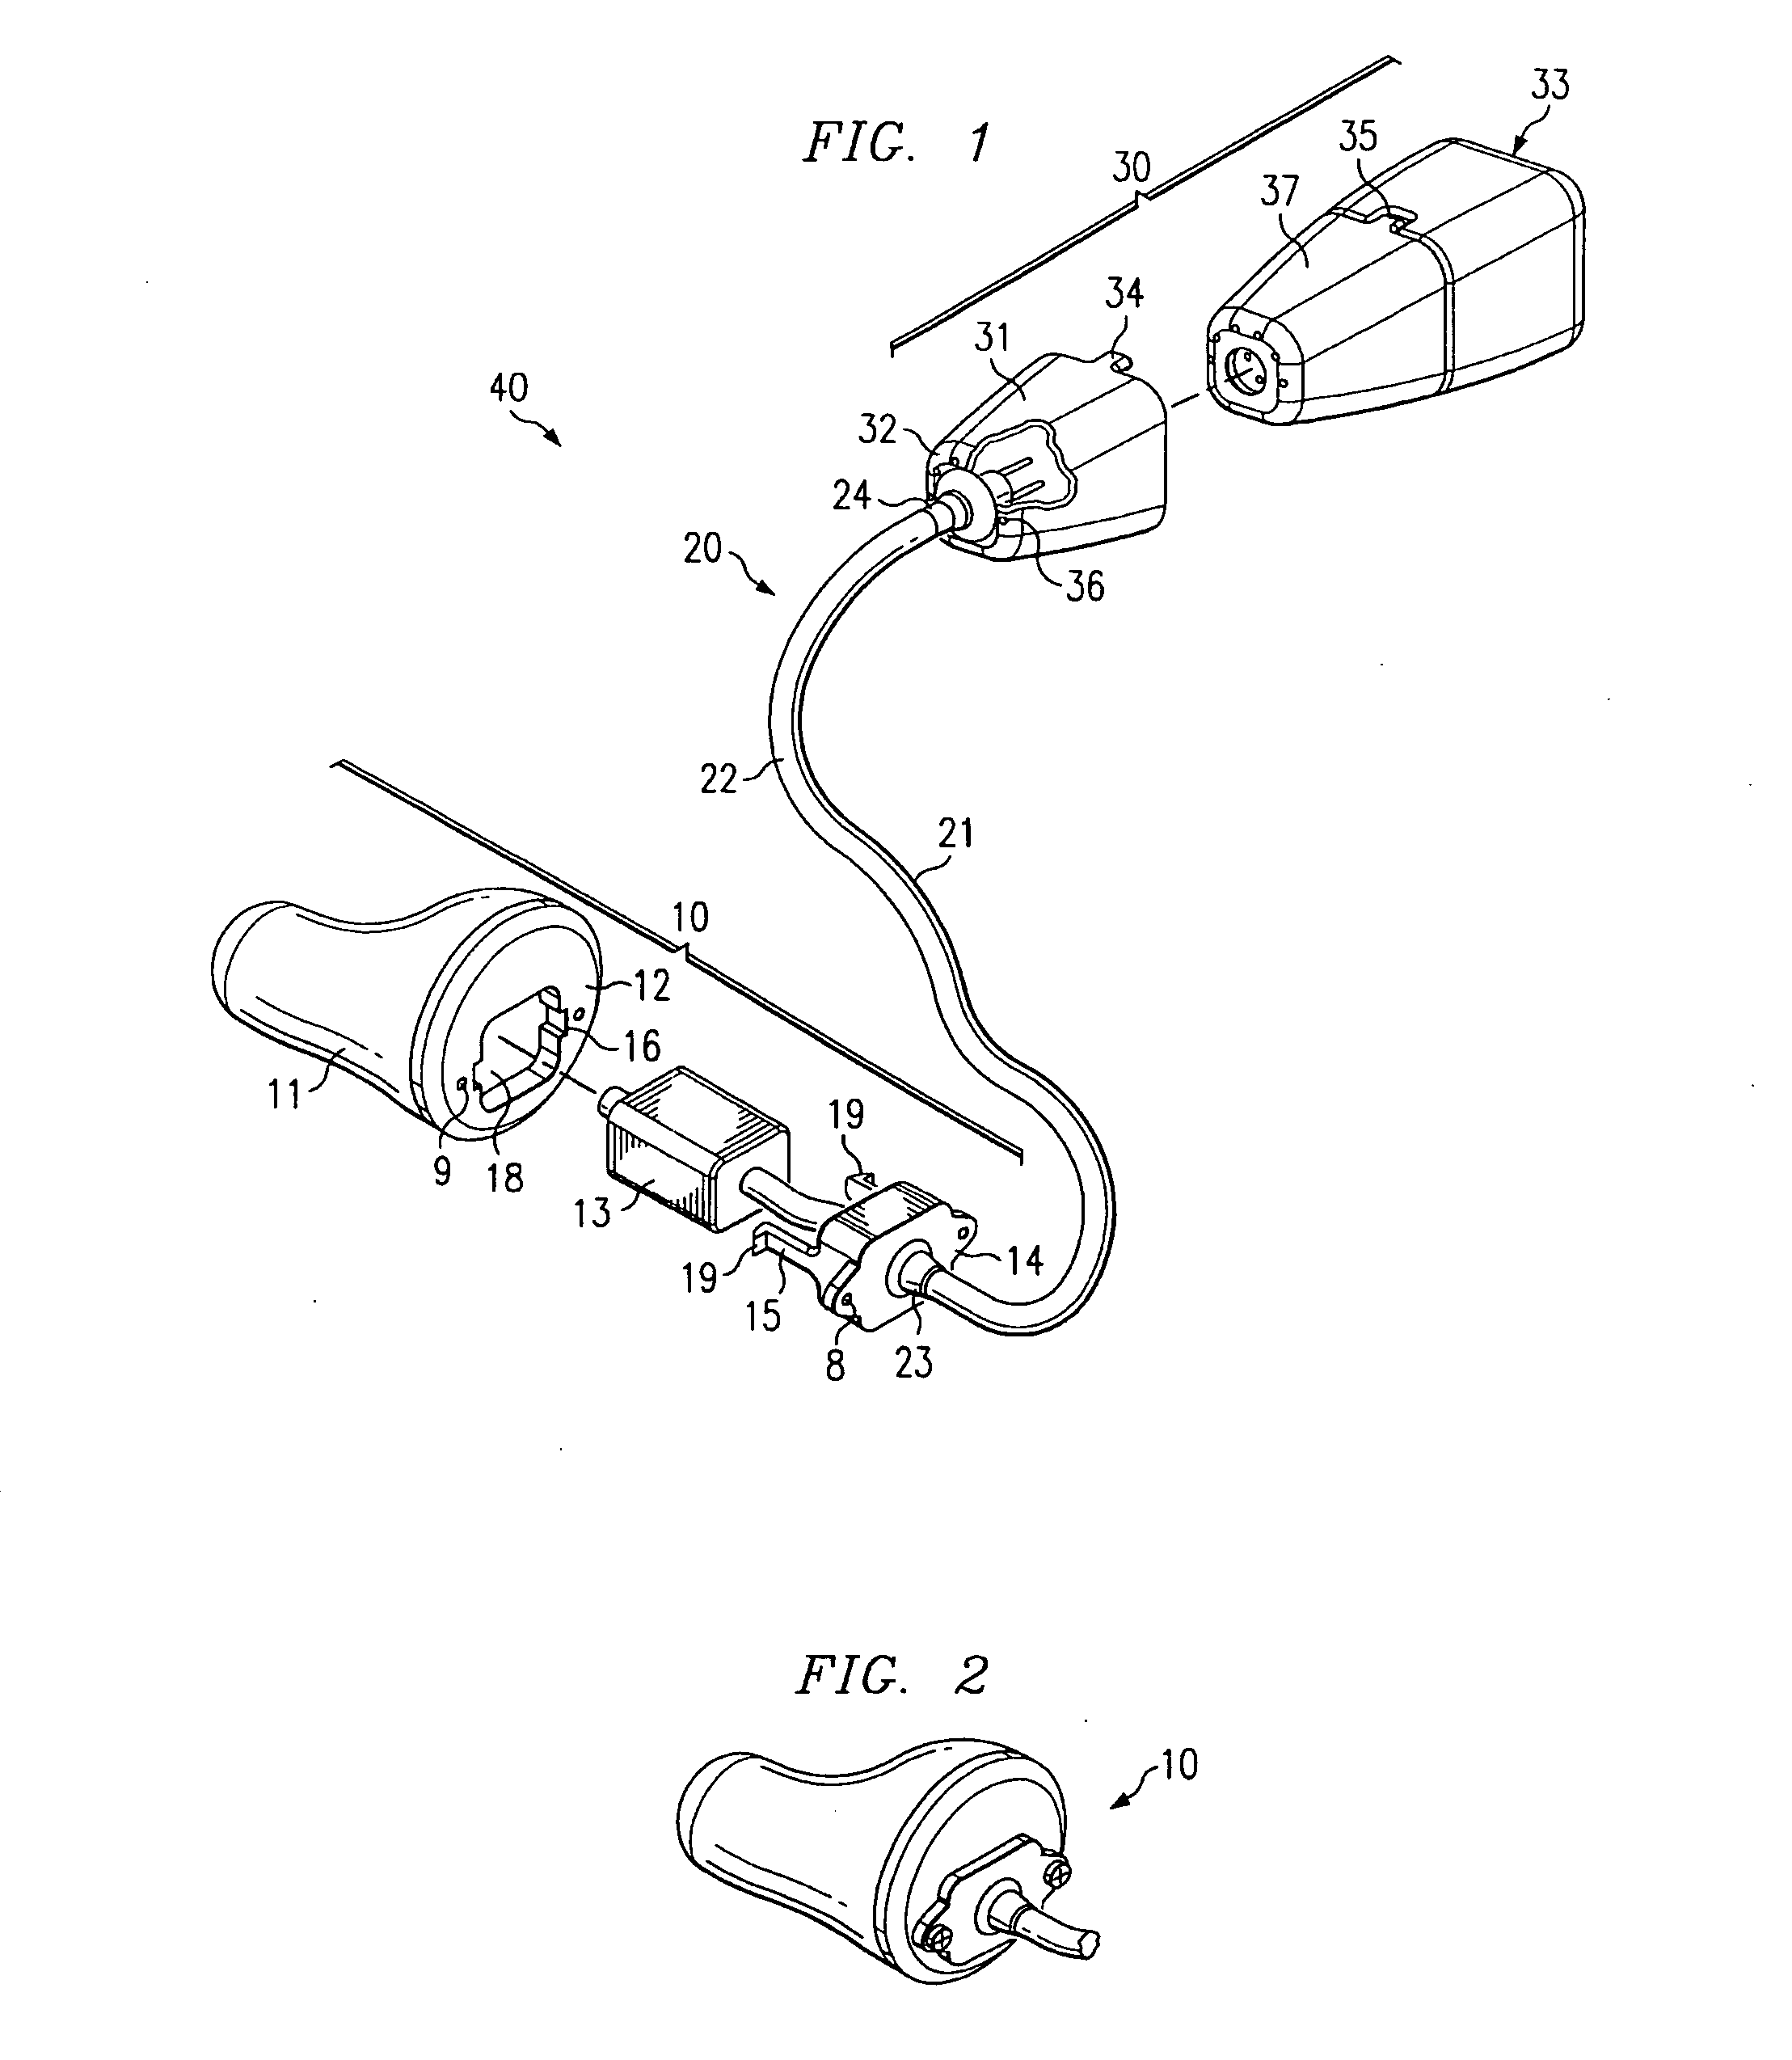 BTE/CIC auditory device and modular connector system therefor